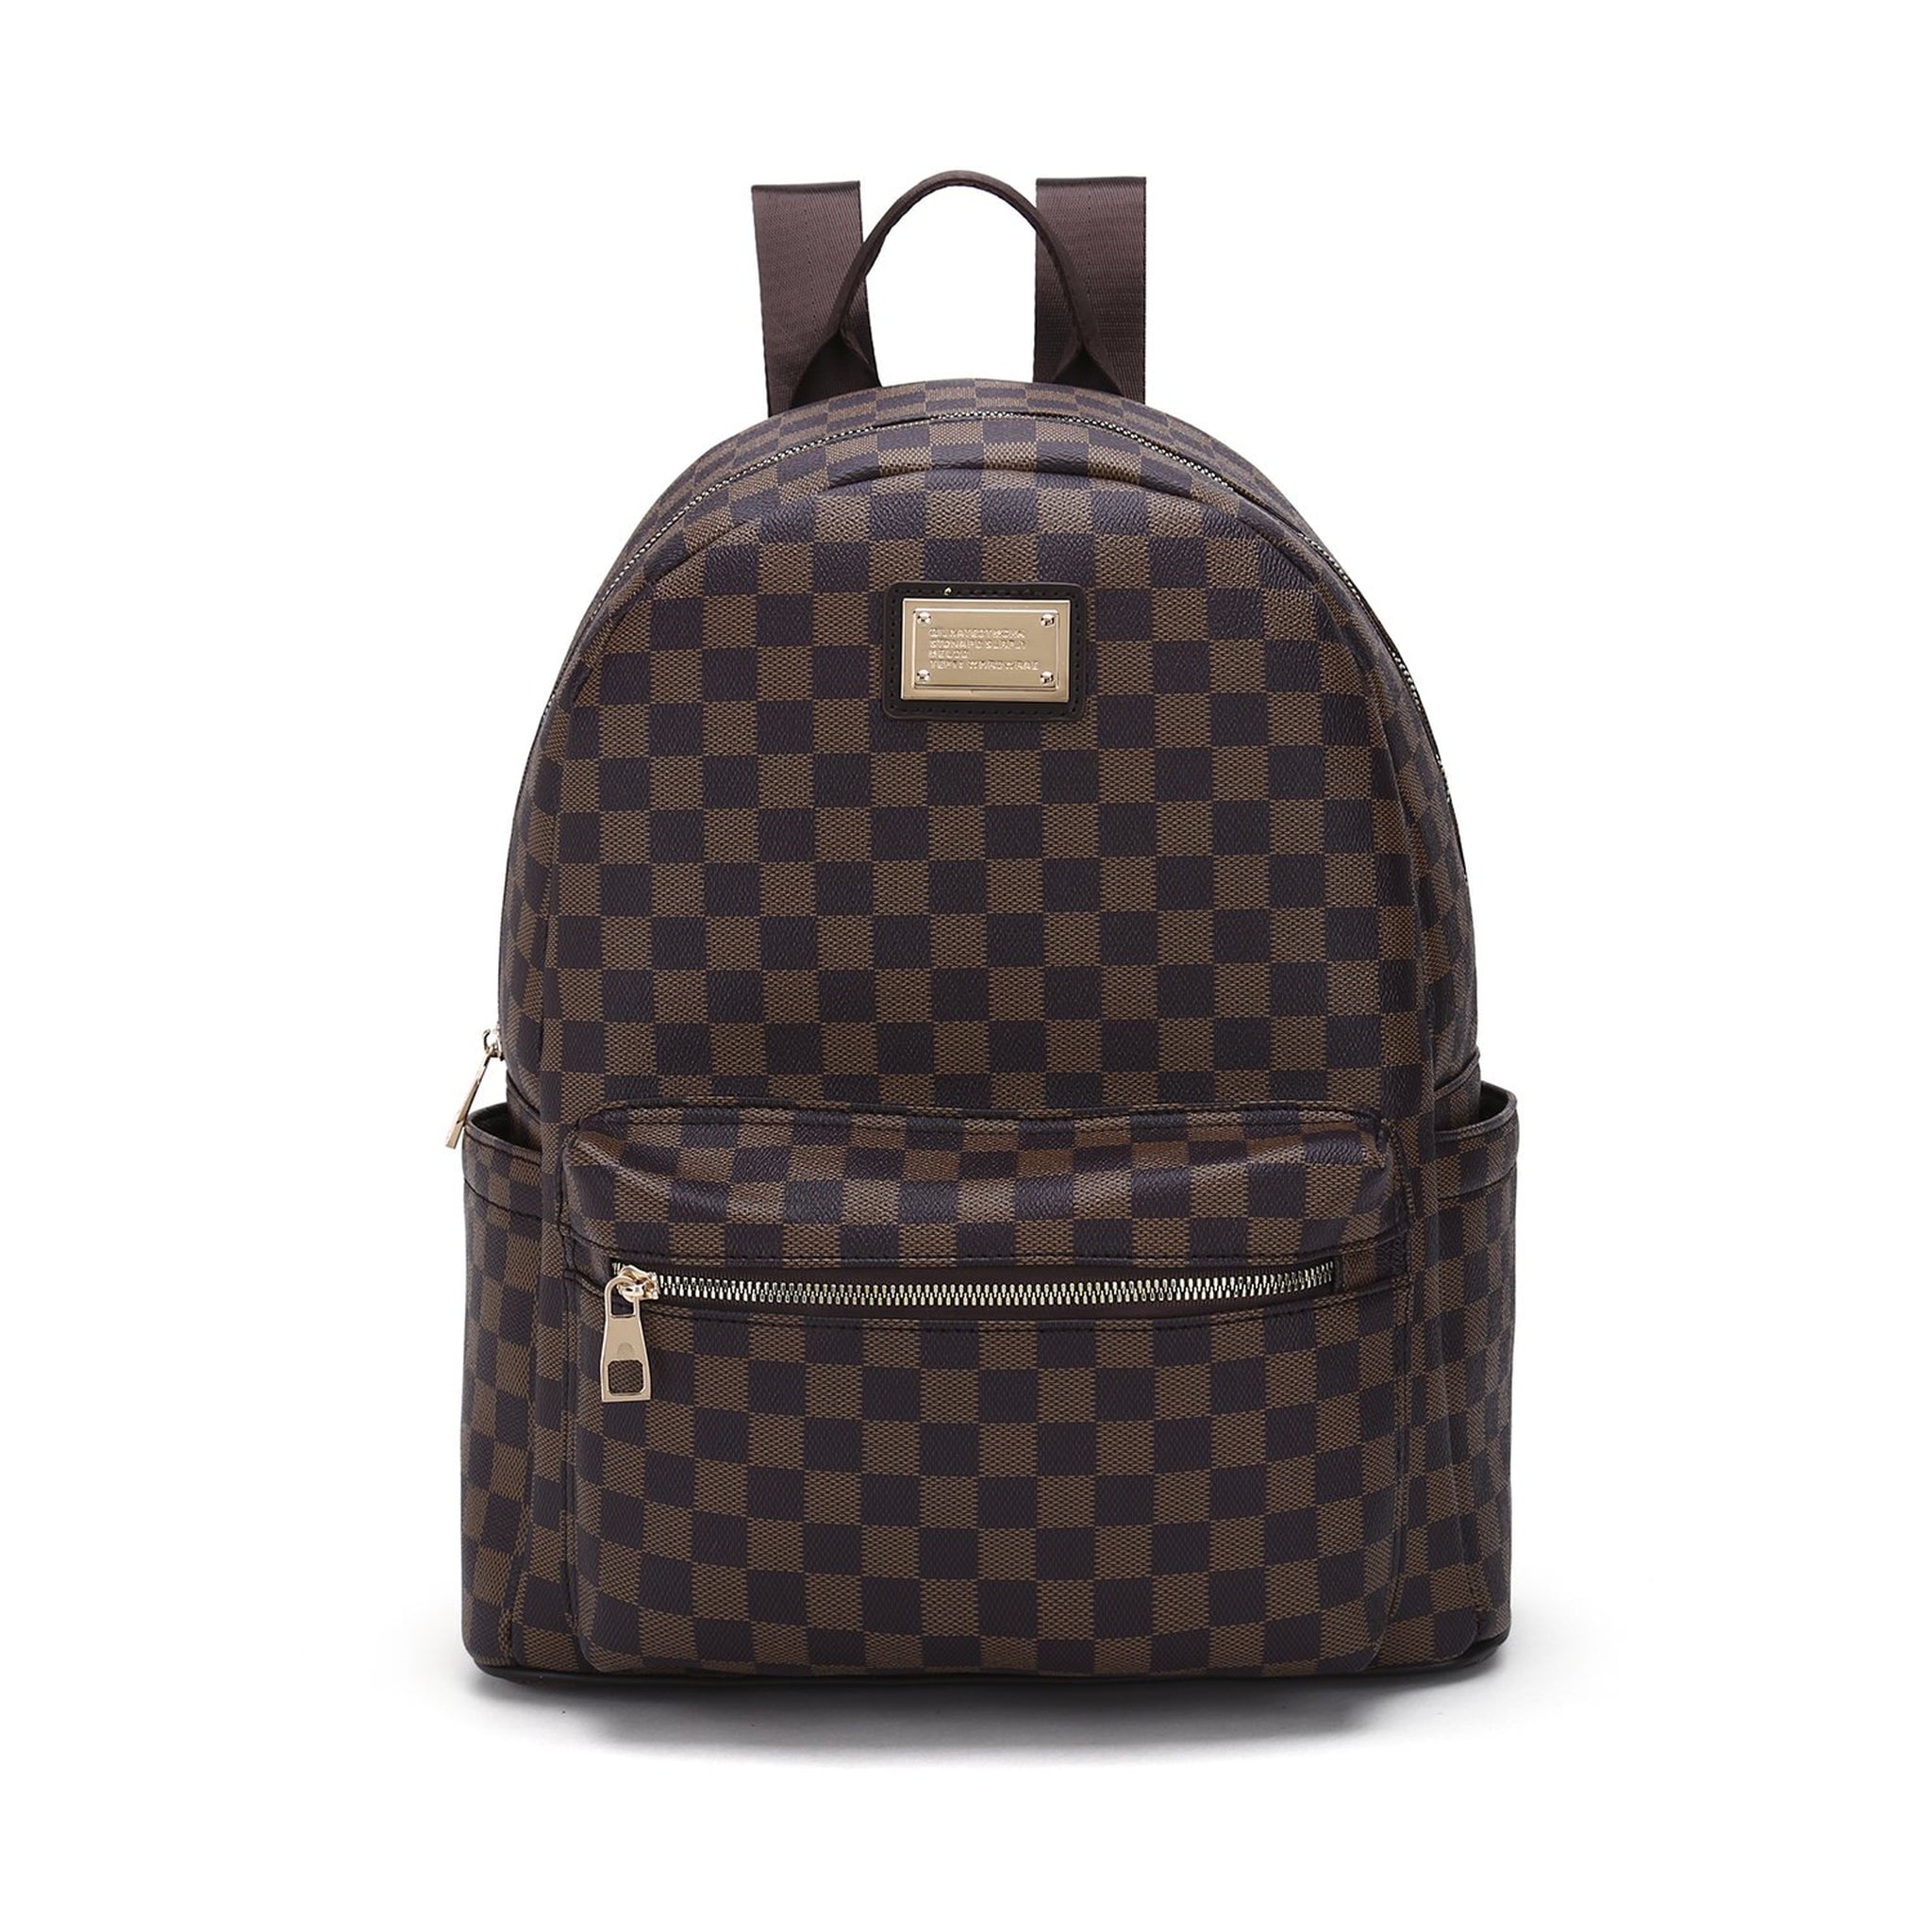  FR Fashion Co. 21 Women's Checkered Leather Backpack Brown